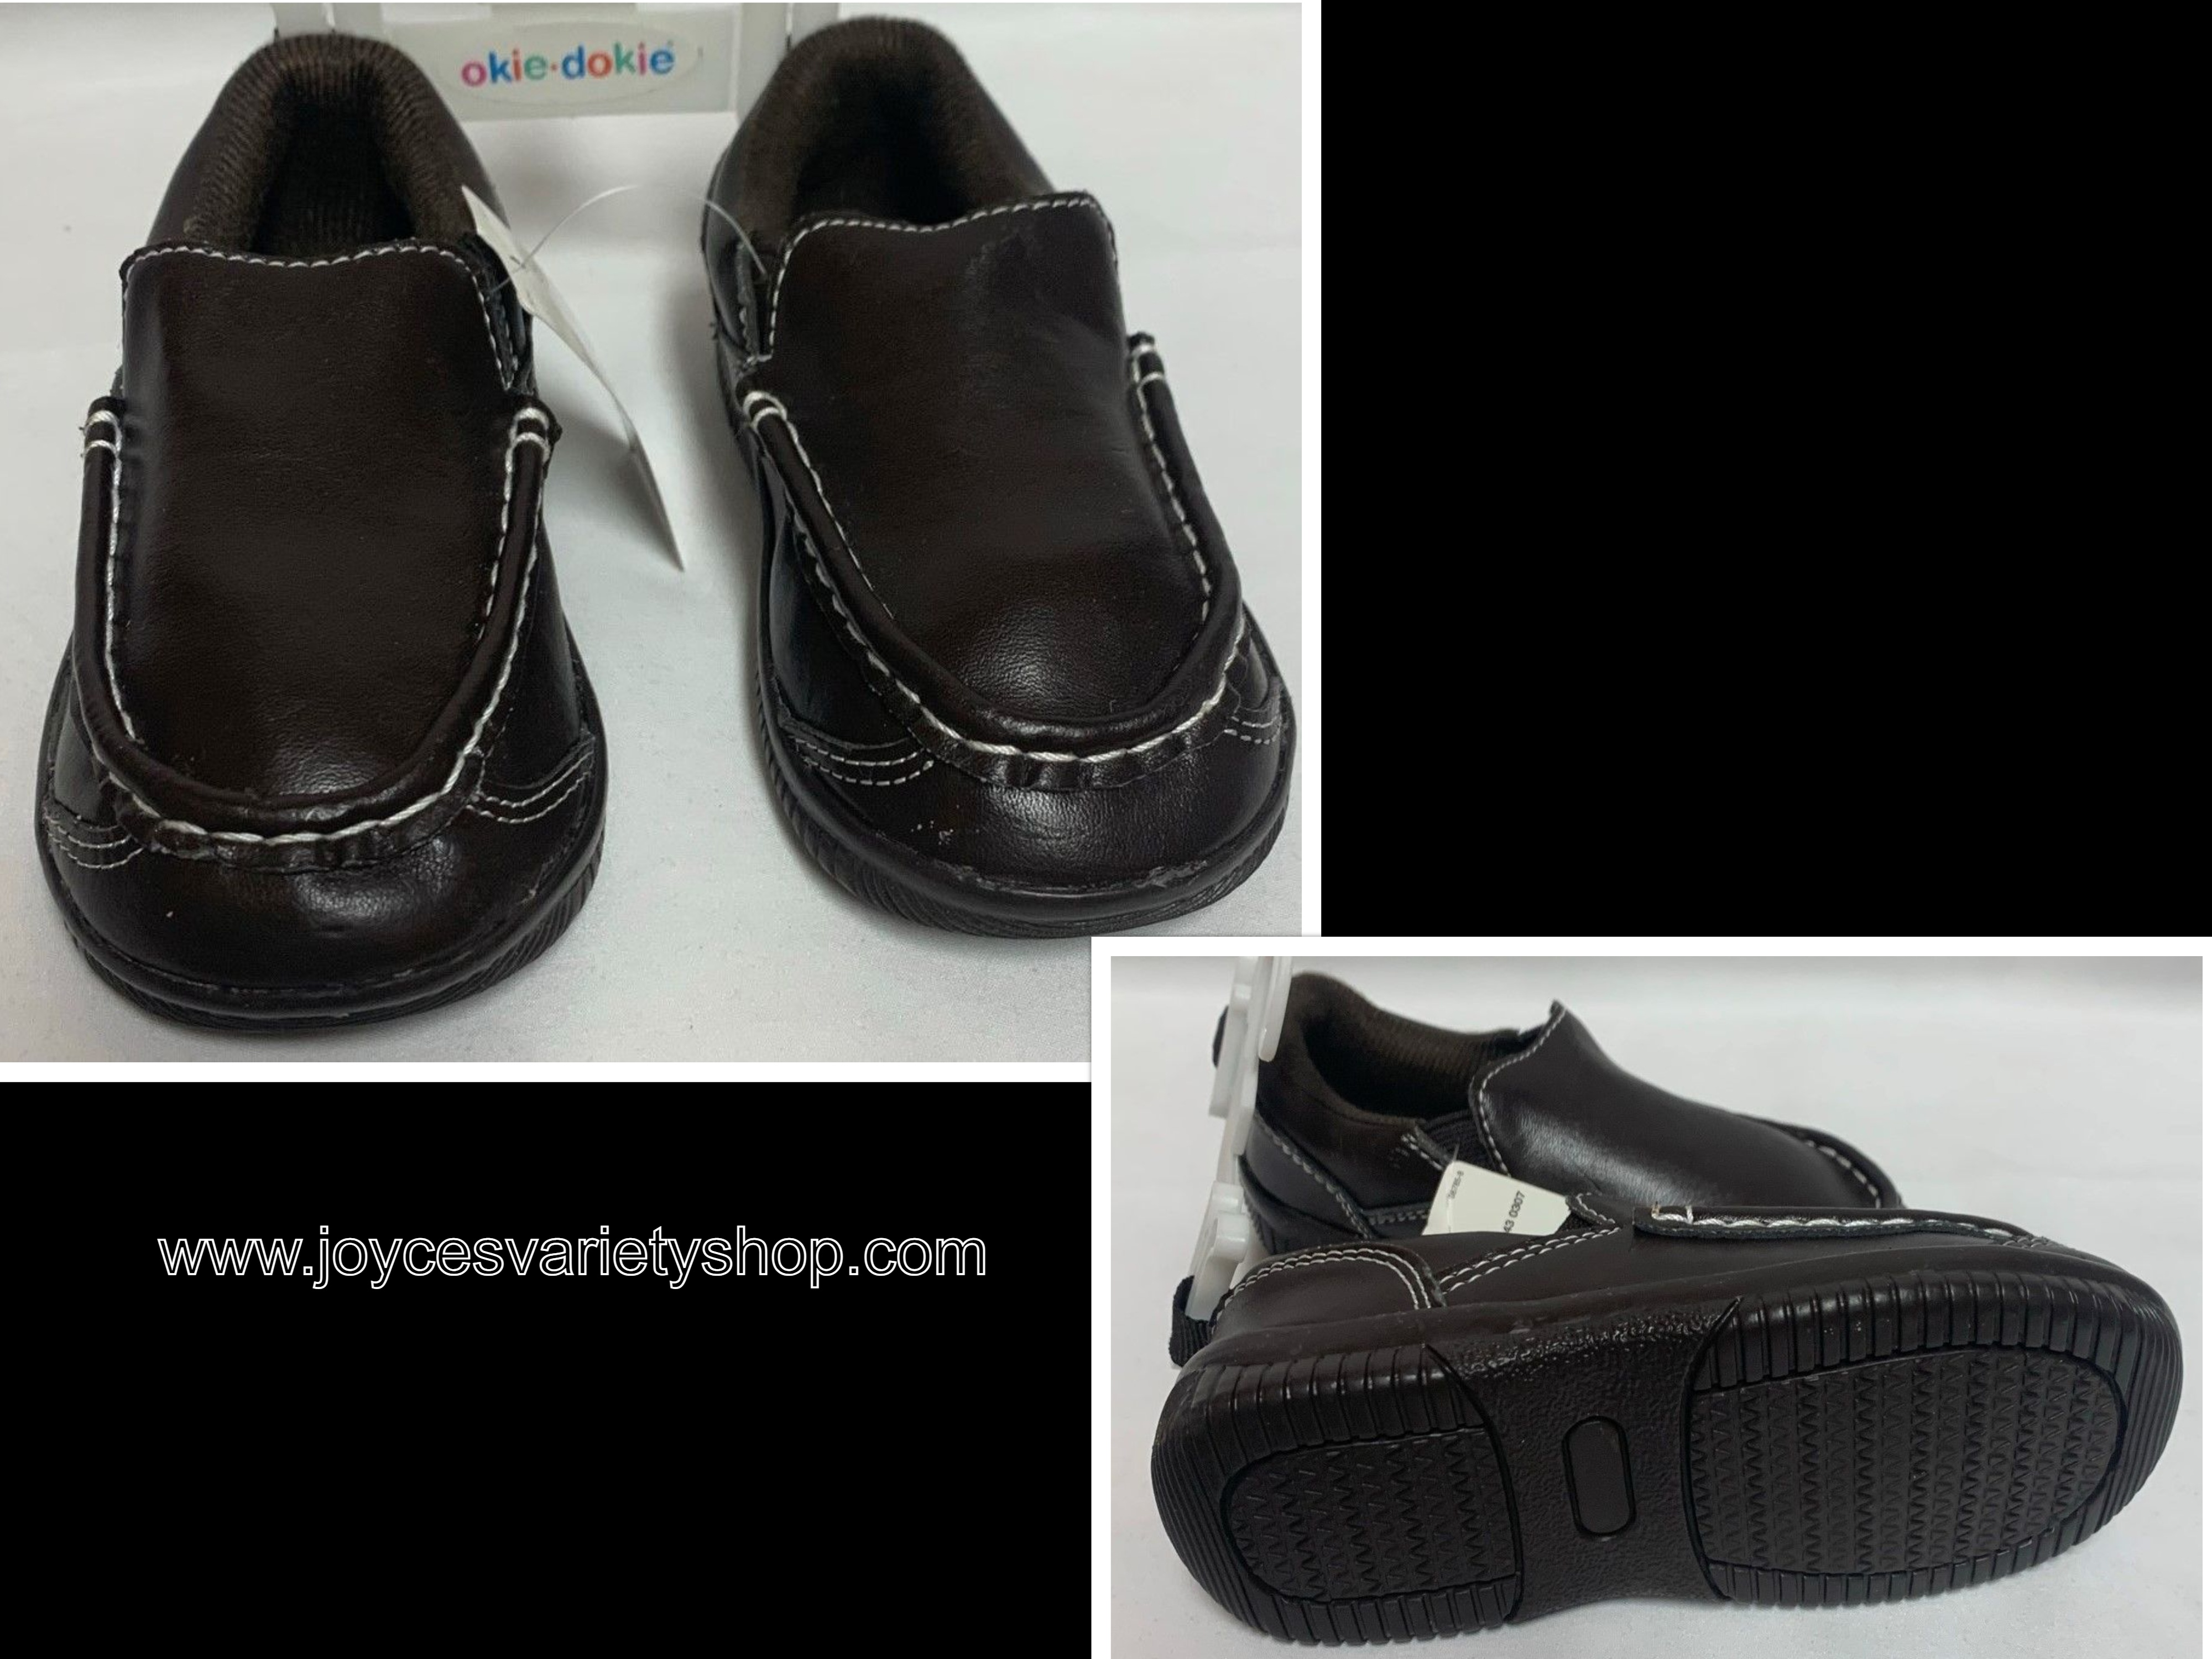 Okie Dokie Toddler Kids Slip On Loafers Shoes Brown Faux Leather Many Sizes